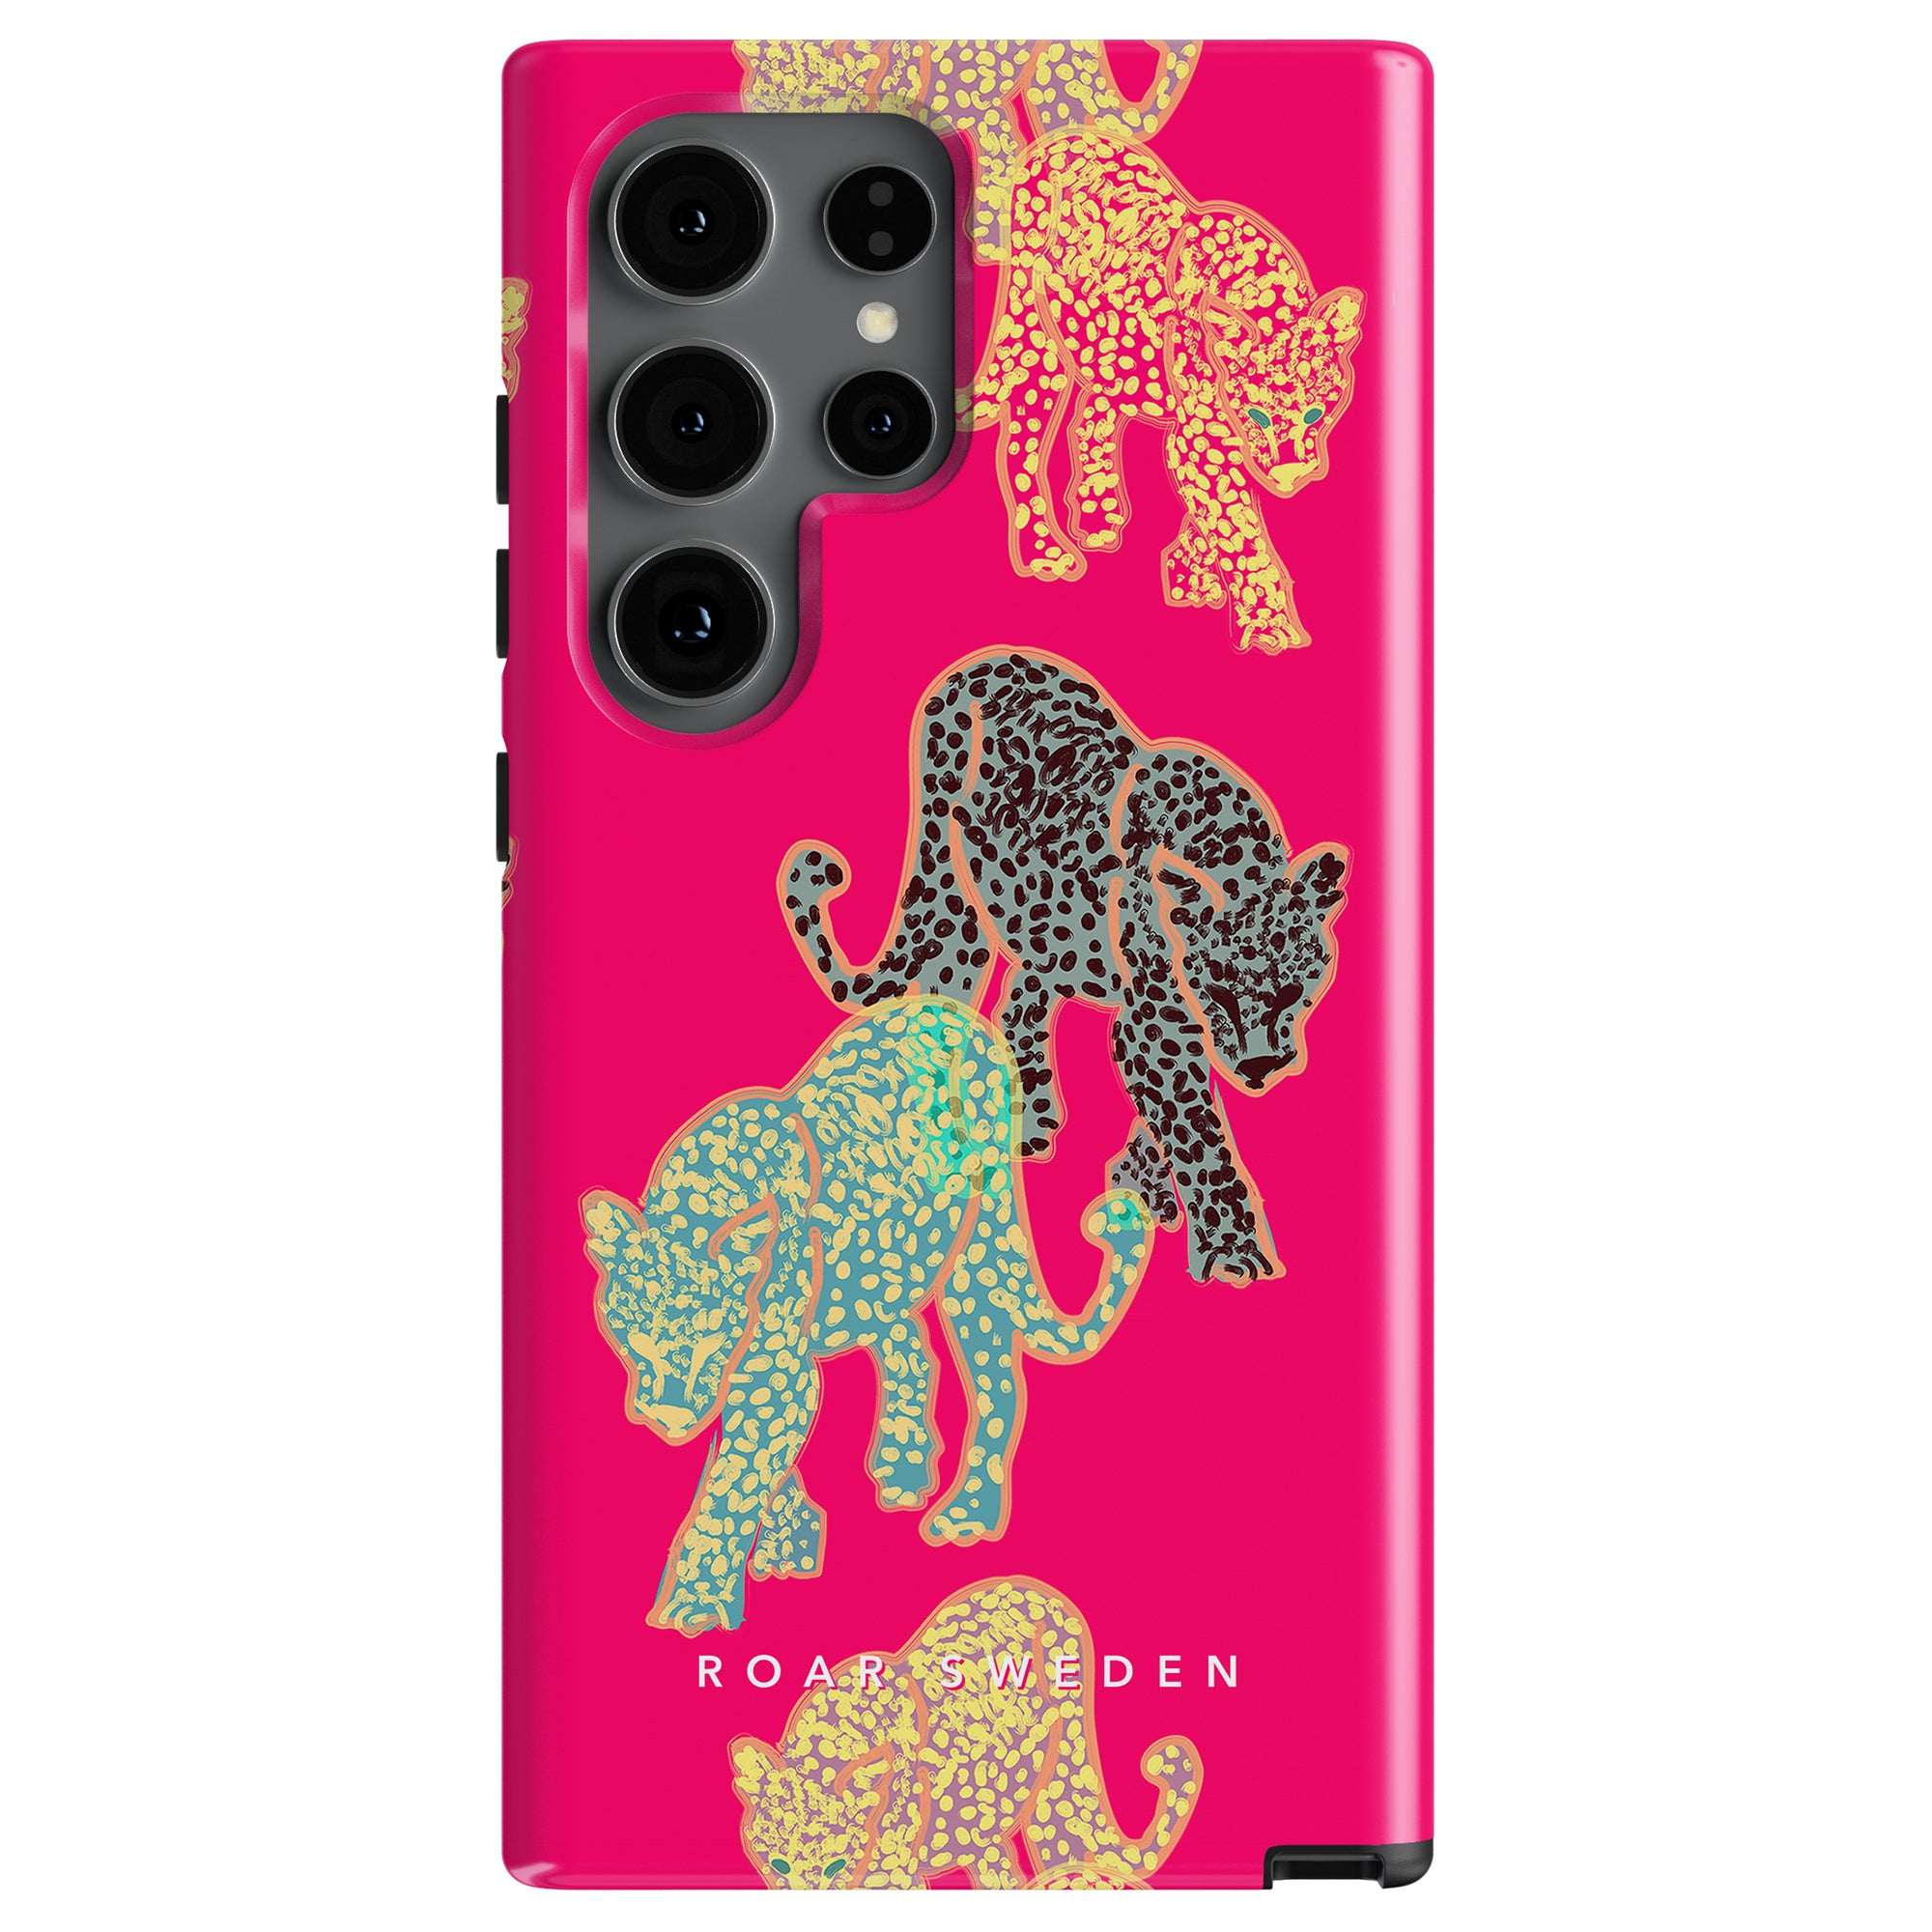 A pink Purr - Tough Case by Roar Sweden, featuring a vibrant leopardmönster with four colorful leopards in yellow, blue, black, and coral. Perfect smartphone skydd for those who want both style and protection.